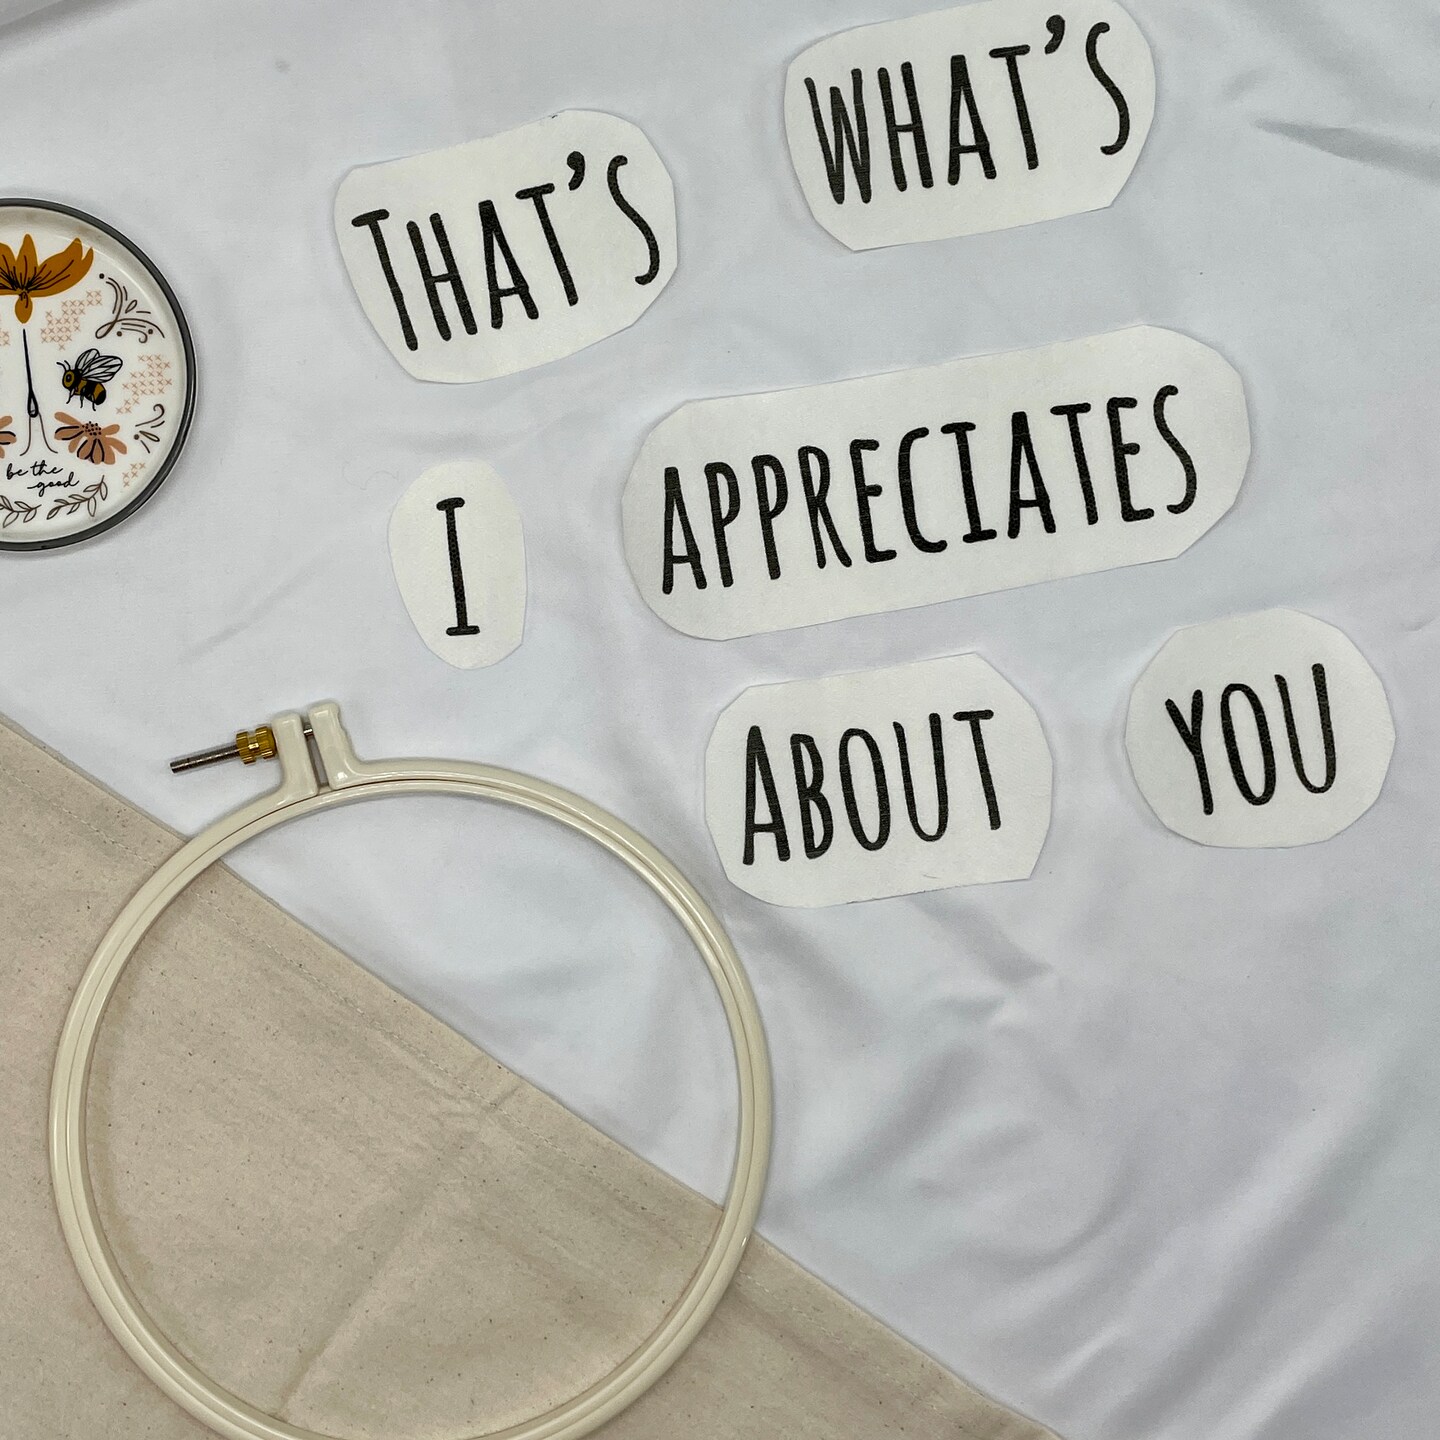 That's What's I Appreciates About You Embroidery Stick and Stitch Design